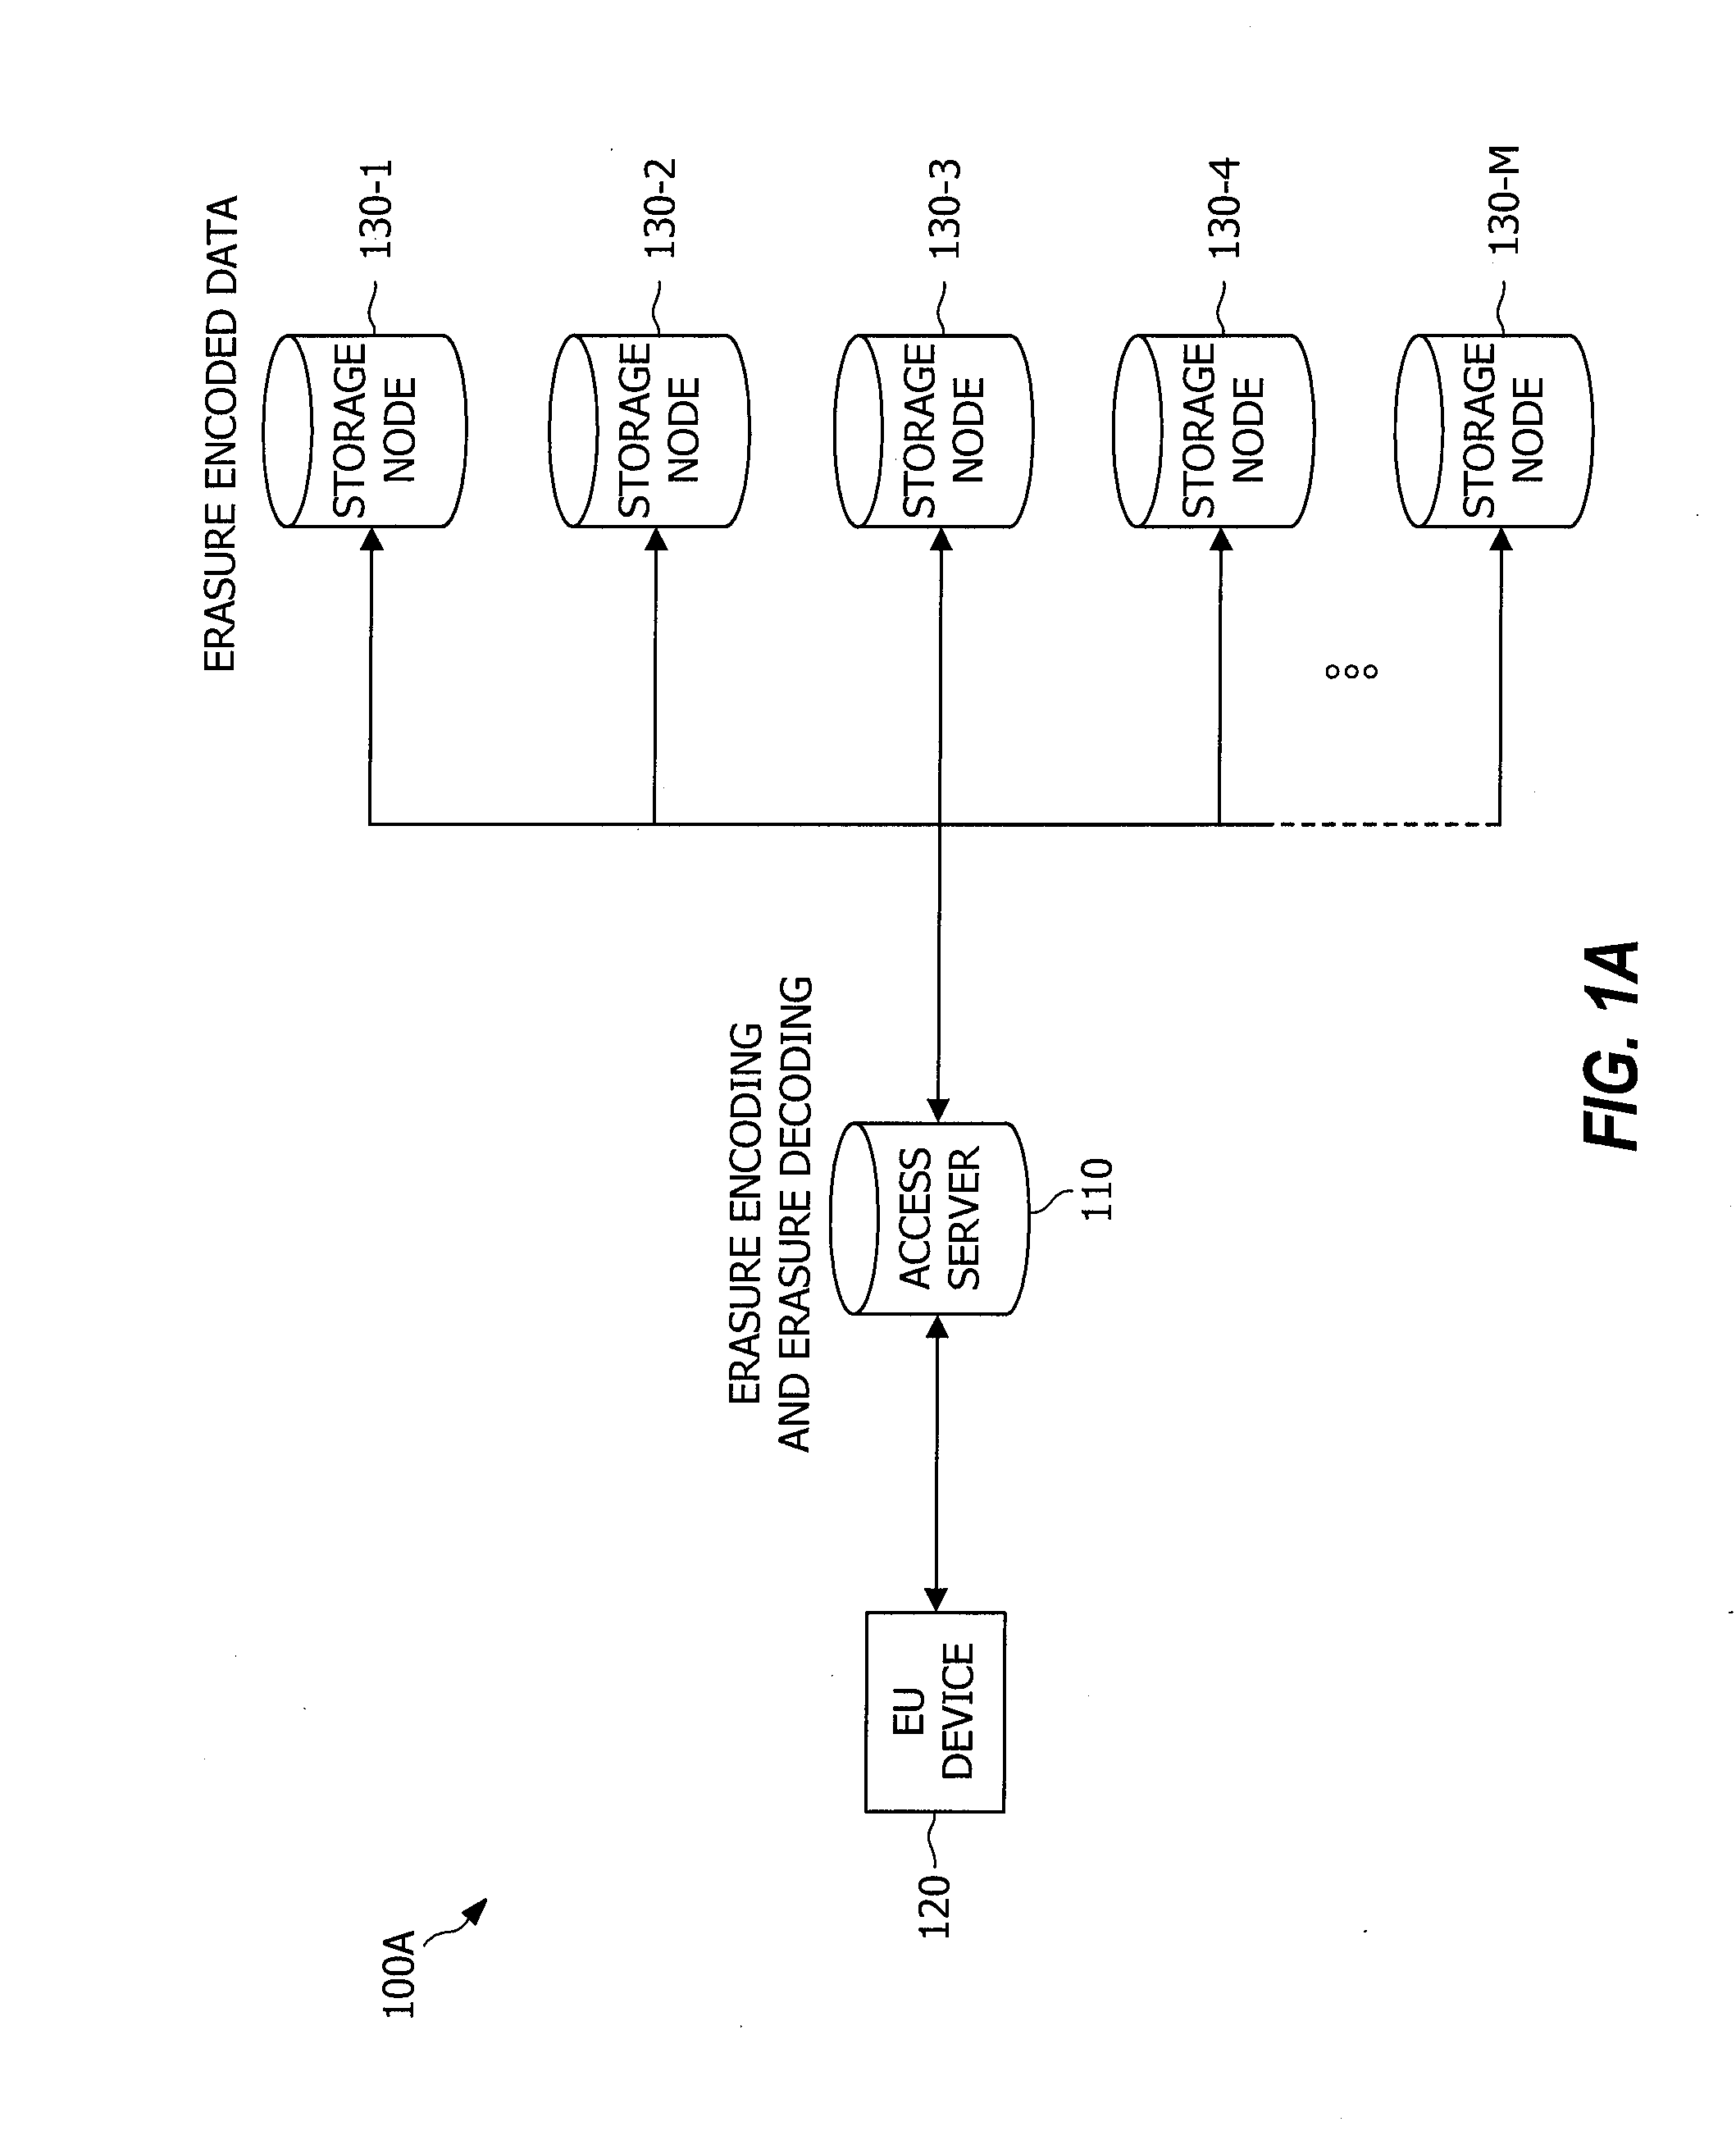 Systems and methods for reliably storing data using liquid distributed storage